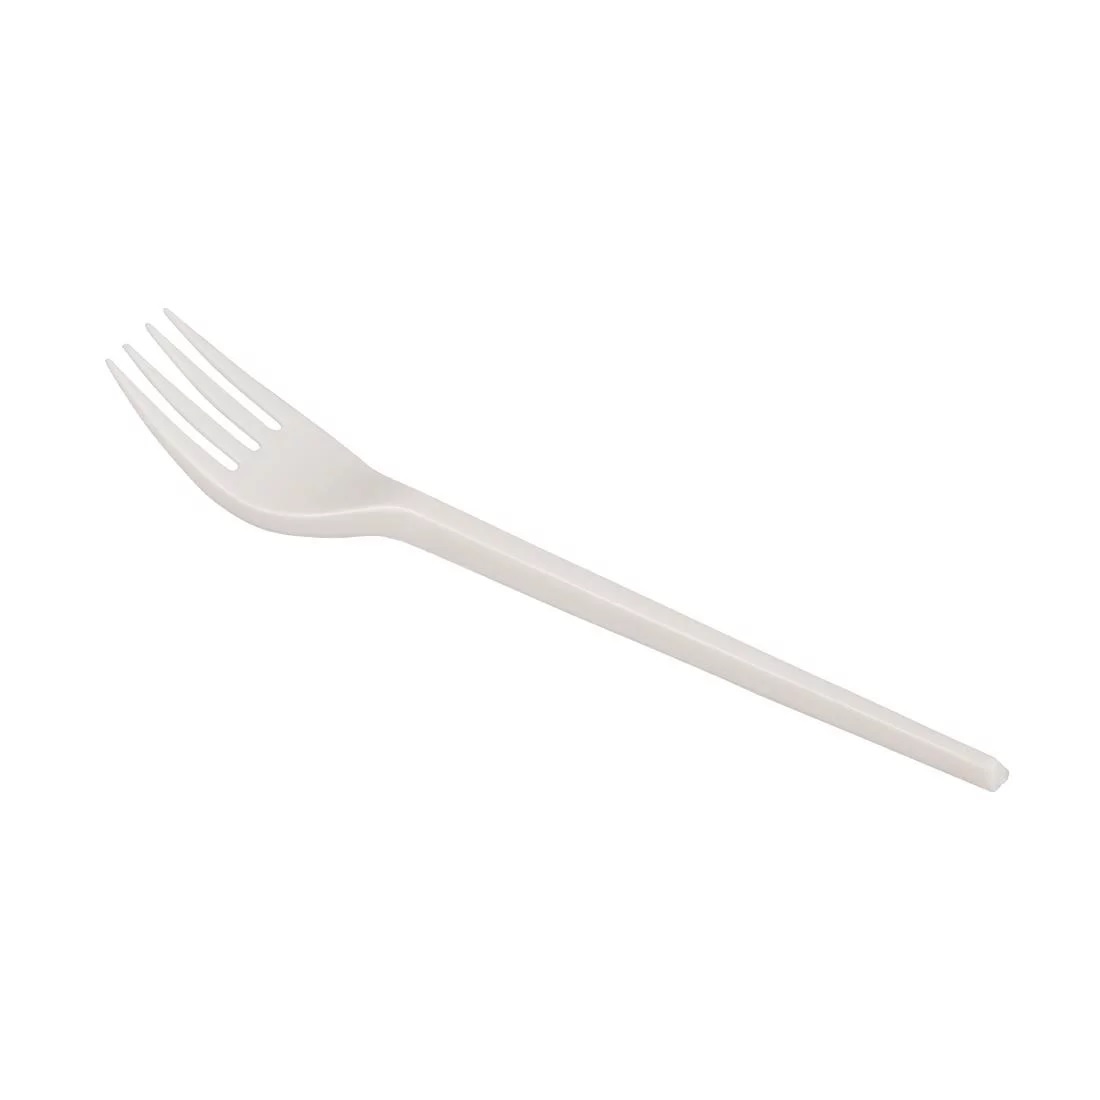 Disposable Utensils for Party Supply Black Disposable Forks Pack of 100 Plastic Forks 